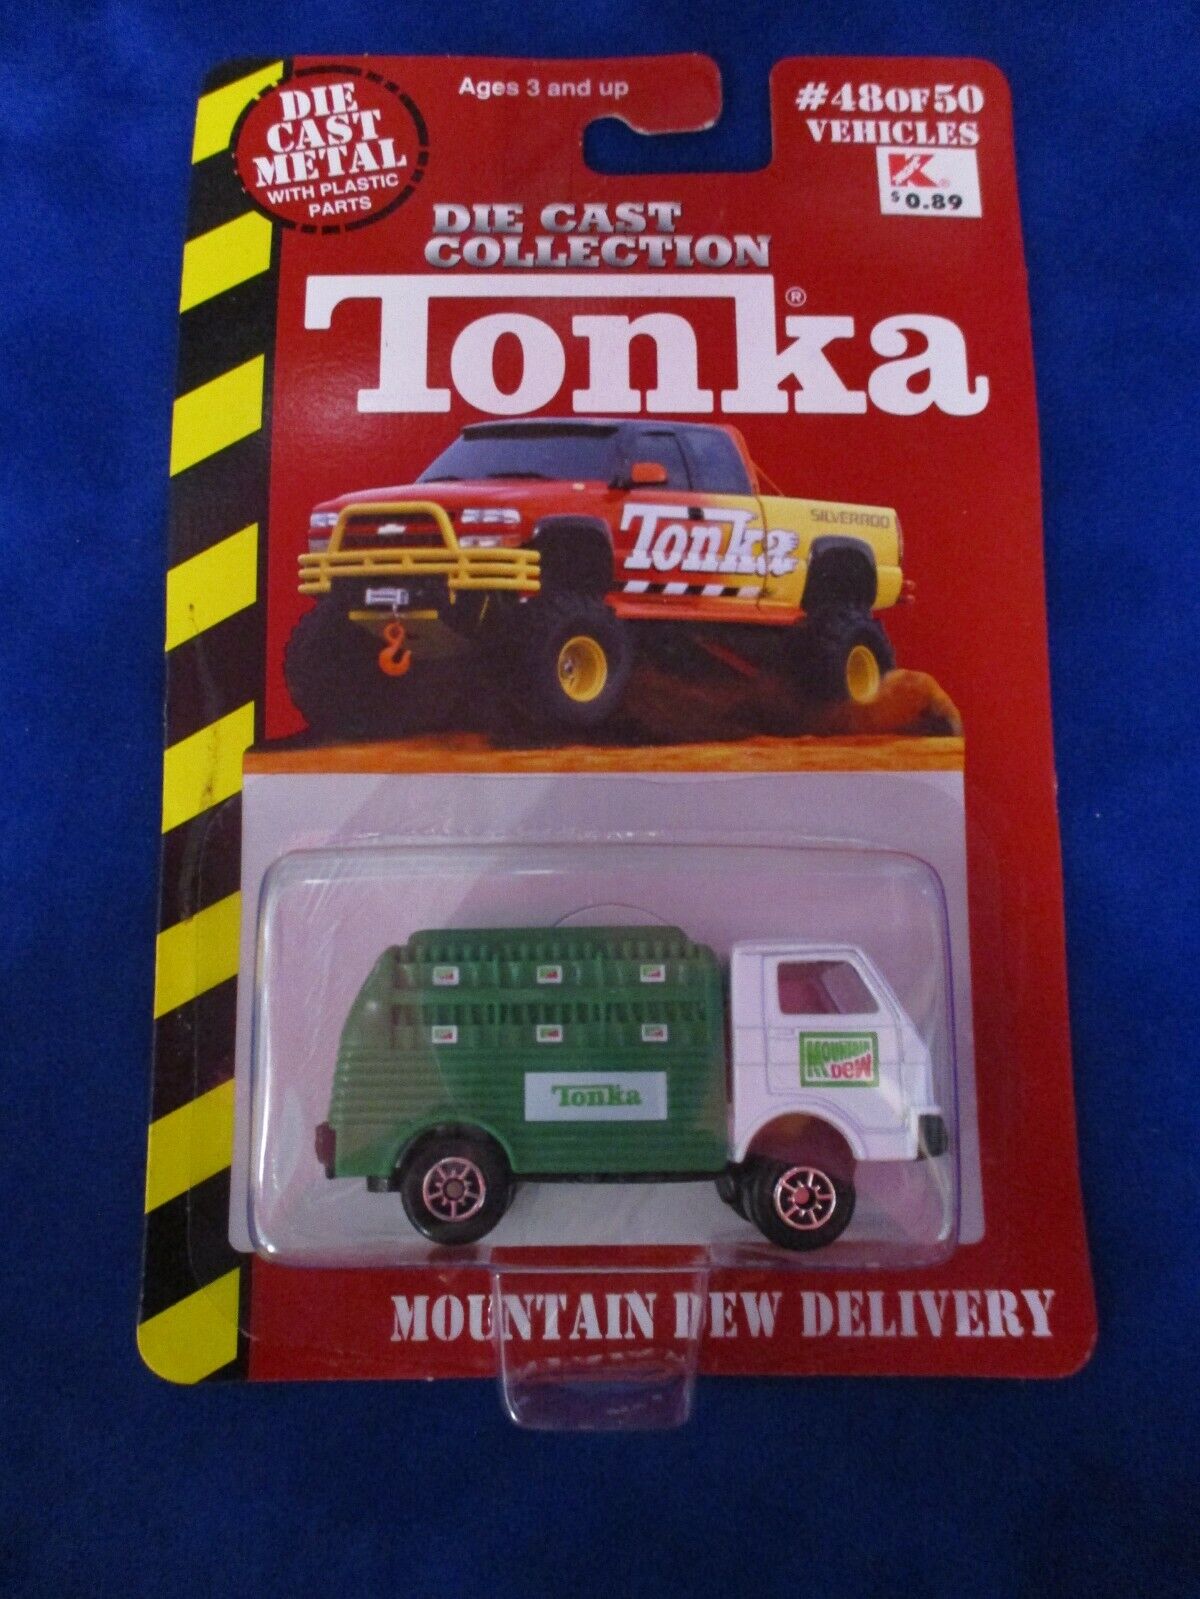 Tonka Die Cast Collection Mountain Dew Delivery 48/50